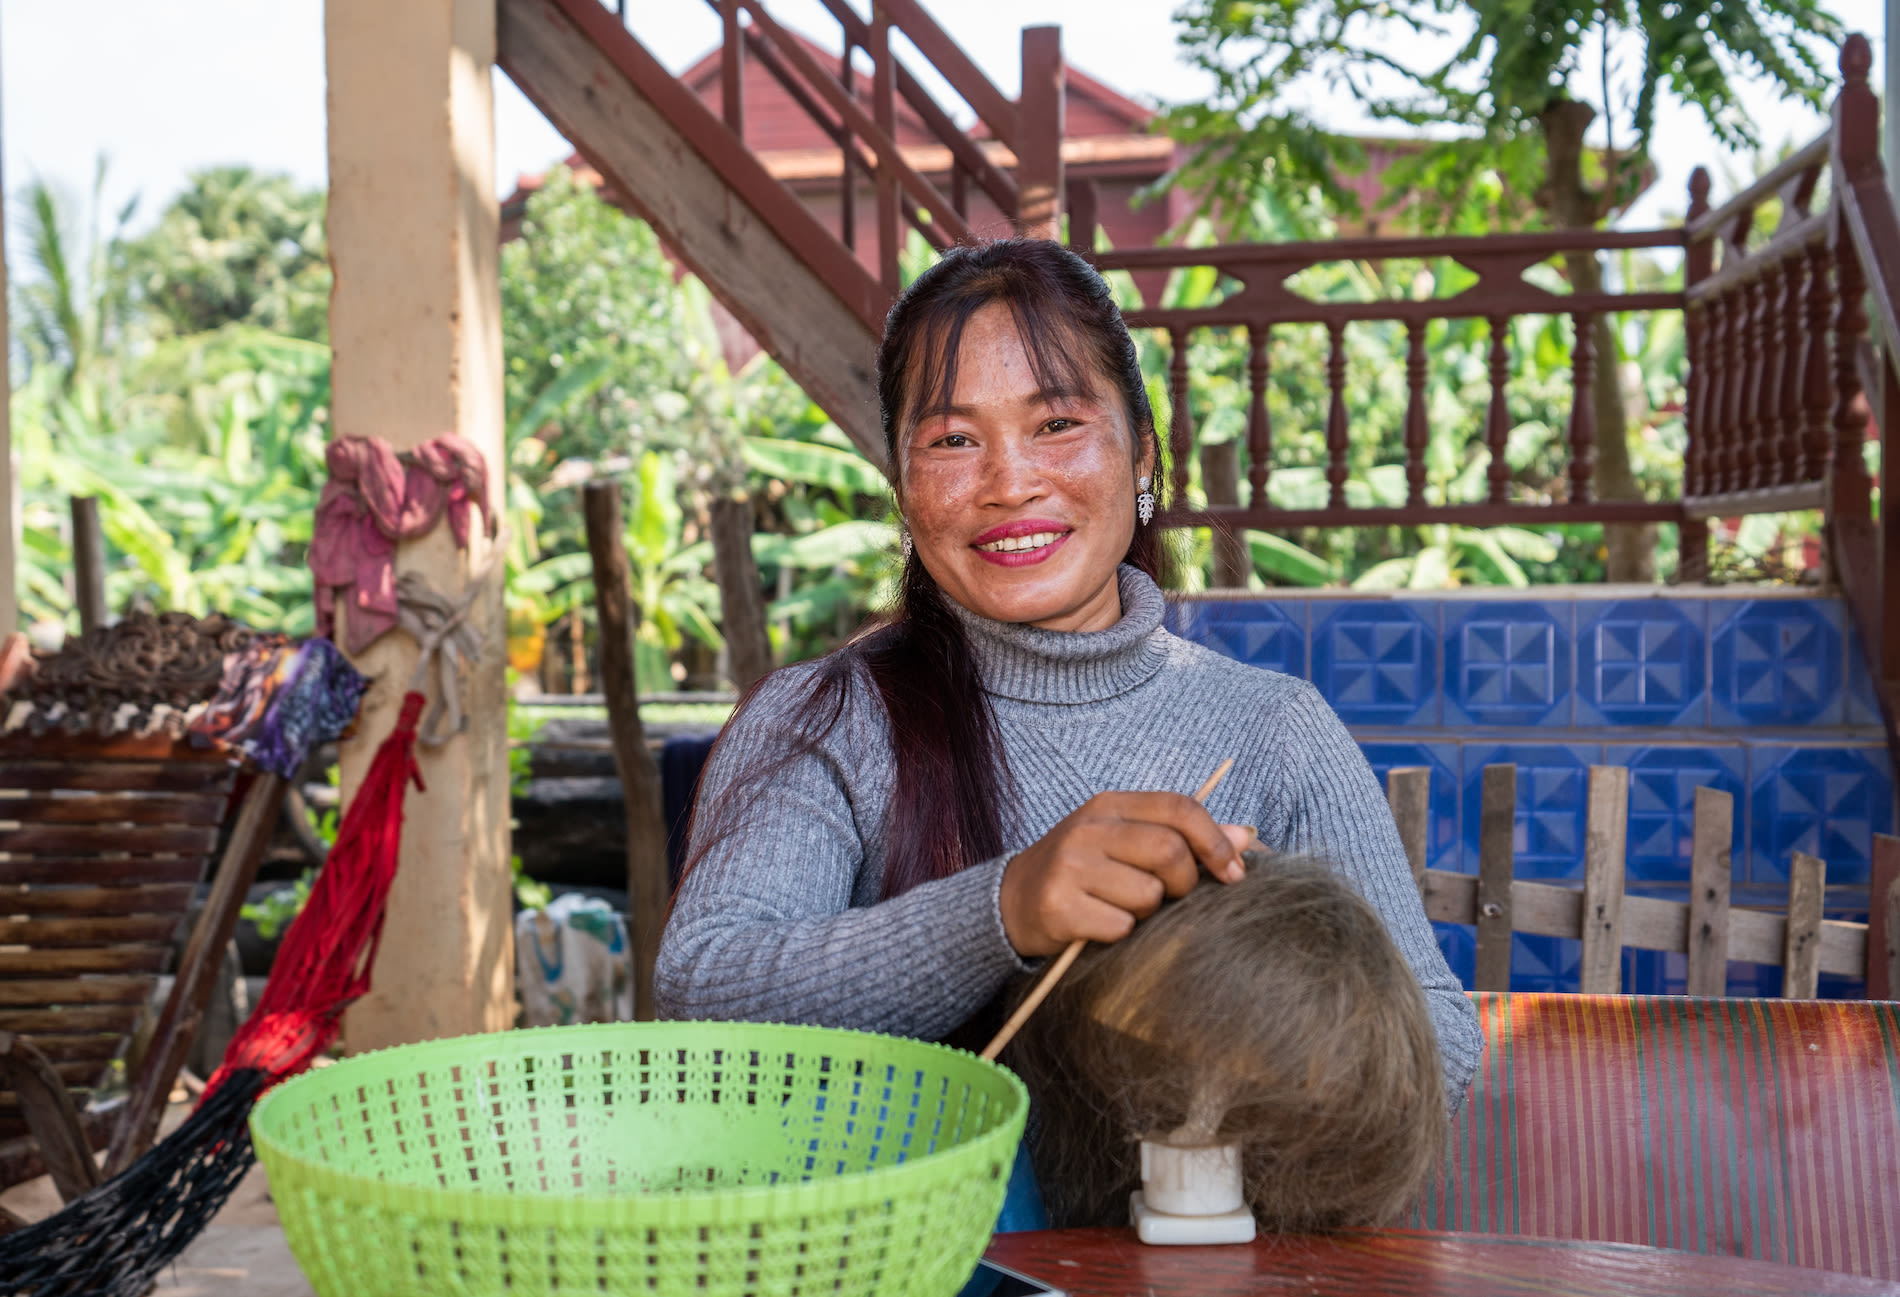 Raim is a Kiva borrower in Cambodia who used her loan to purchase a clean cookstove from ACE for her family. 